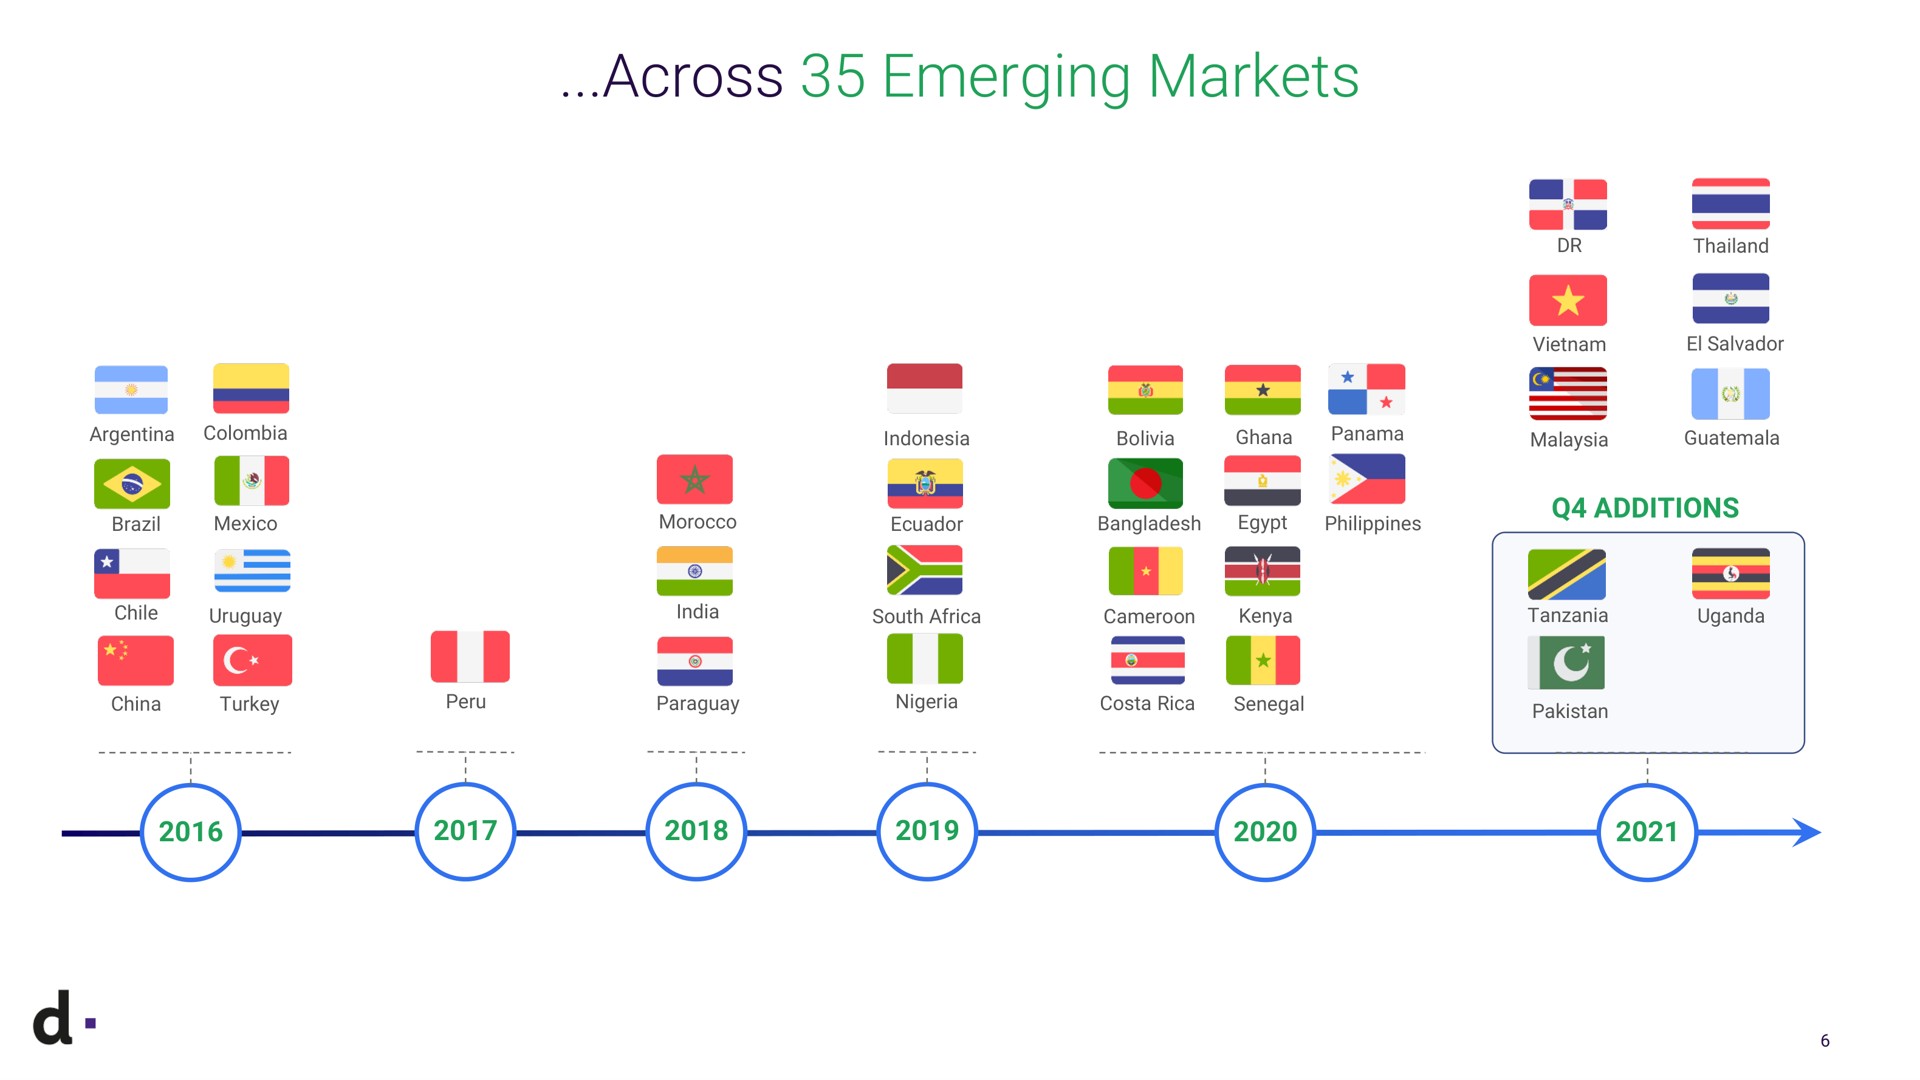 across emerging markets morocco a mis south a additions a bolivia panama costa brazil a chile i china turkey | dLocal